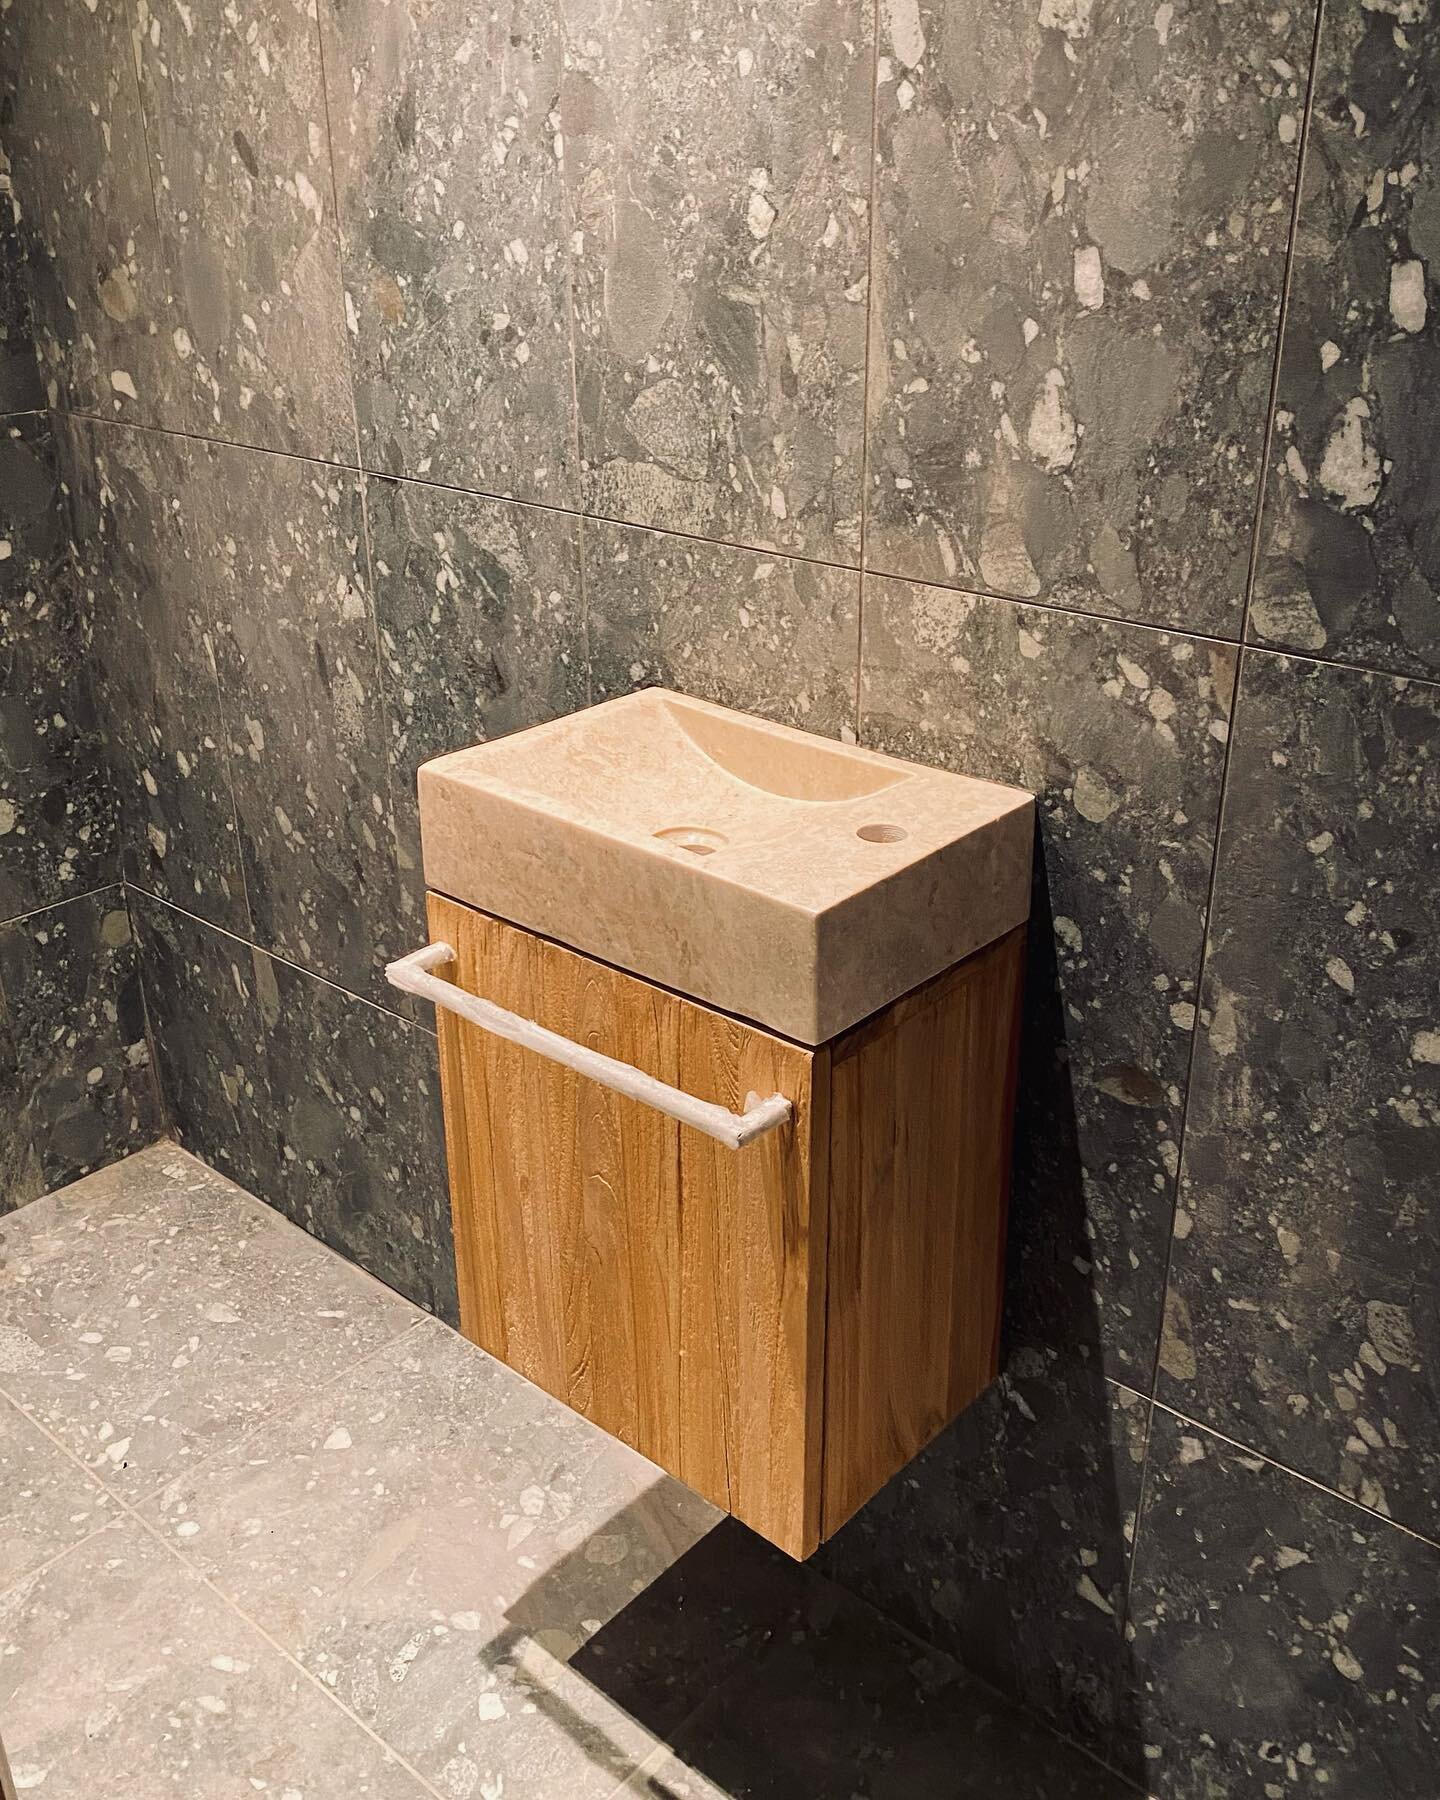 Work-in-progress cloakroom at our 18RG site. Obviously tap, mirror, WC, etc are all still missing, but we like the moody atmosphere in this smallest room of the house. 

architecture/ design: KOH Architects 
Tiles: @mandarinstoneofficial 
Vanity / ba